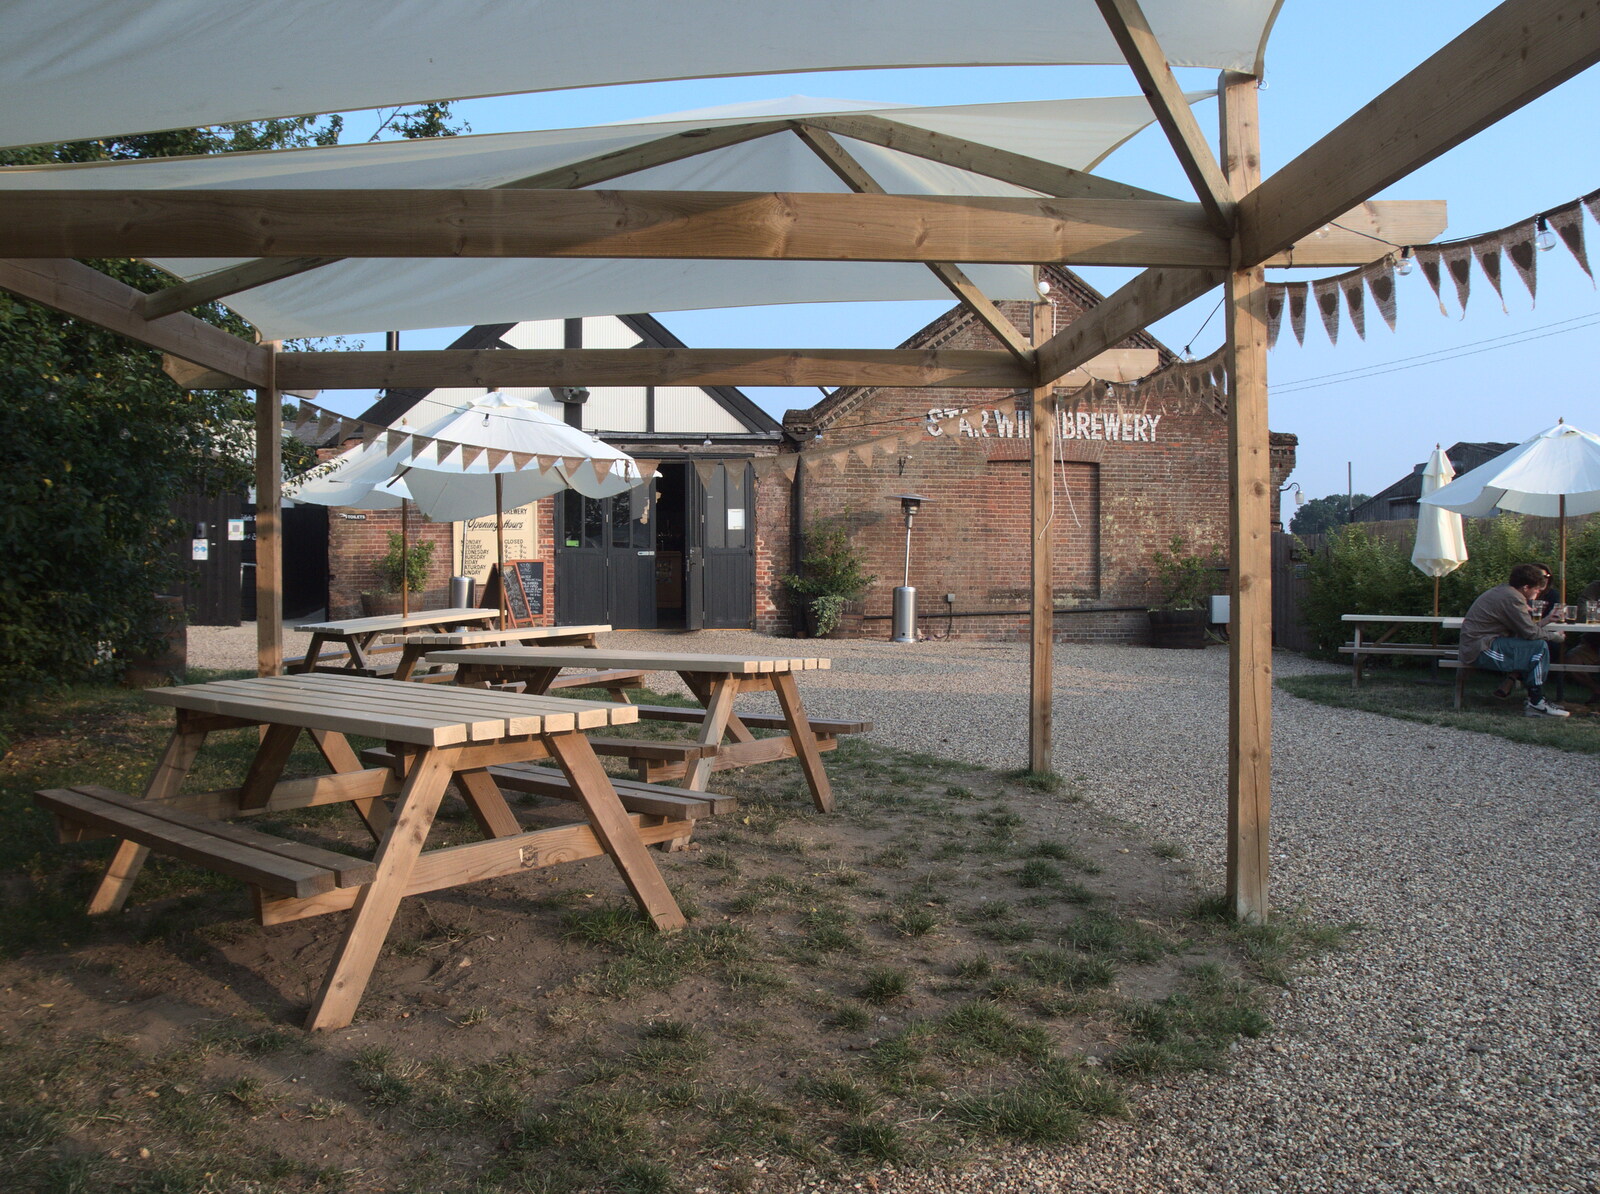 Star Wing's beer garden from Pizza at the Village Hall, Brome, Suffolk - 24th June 2022